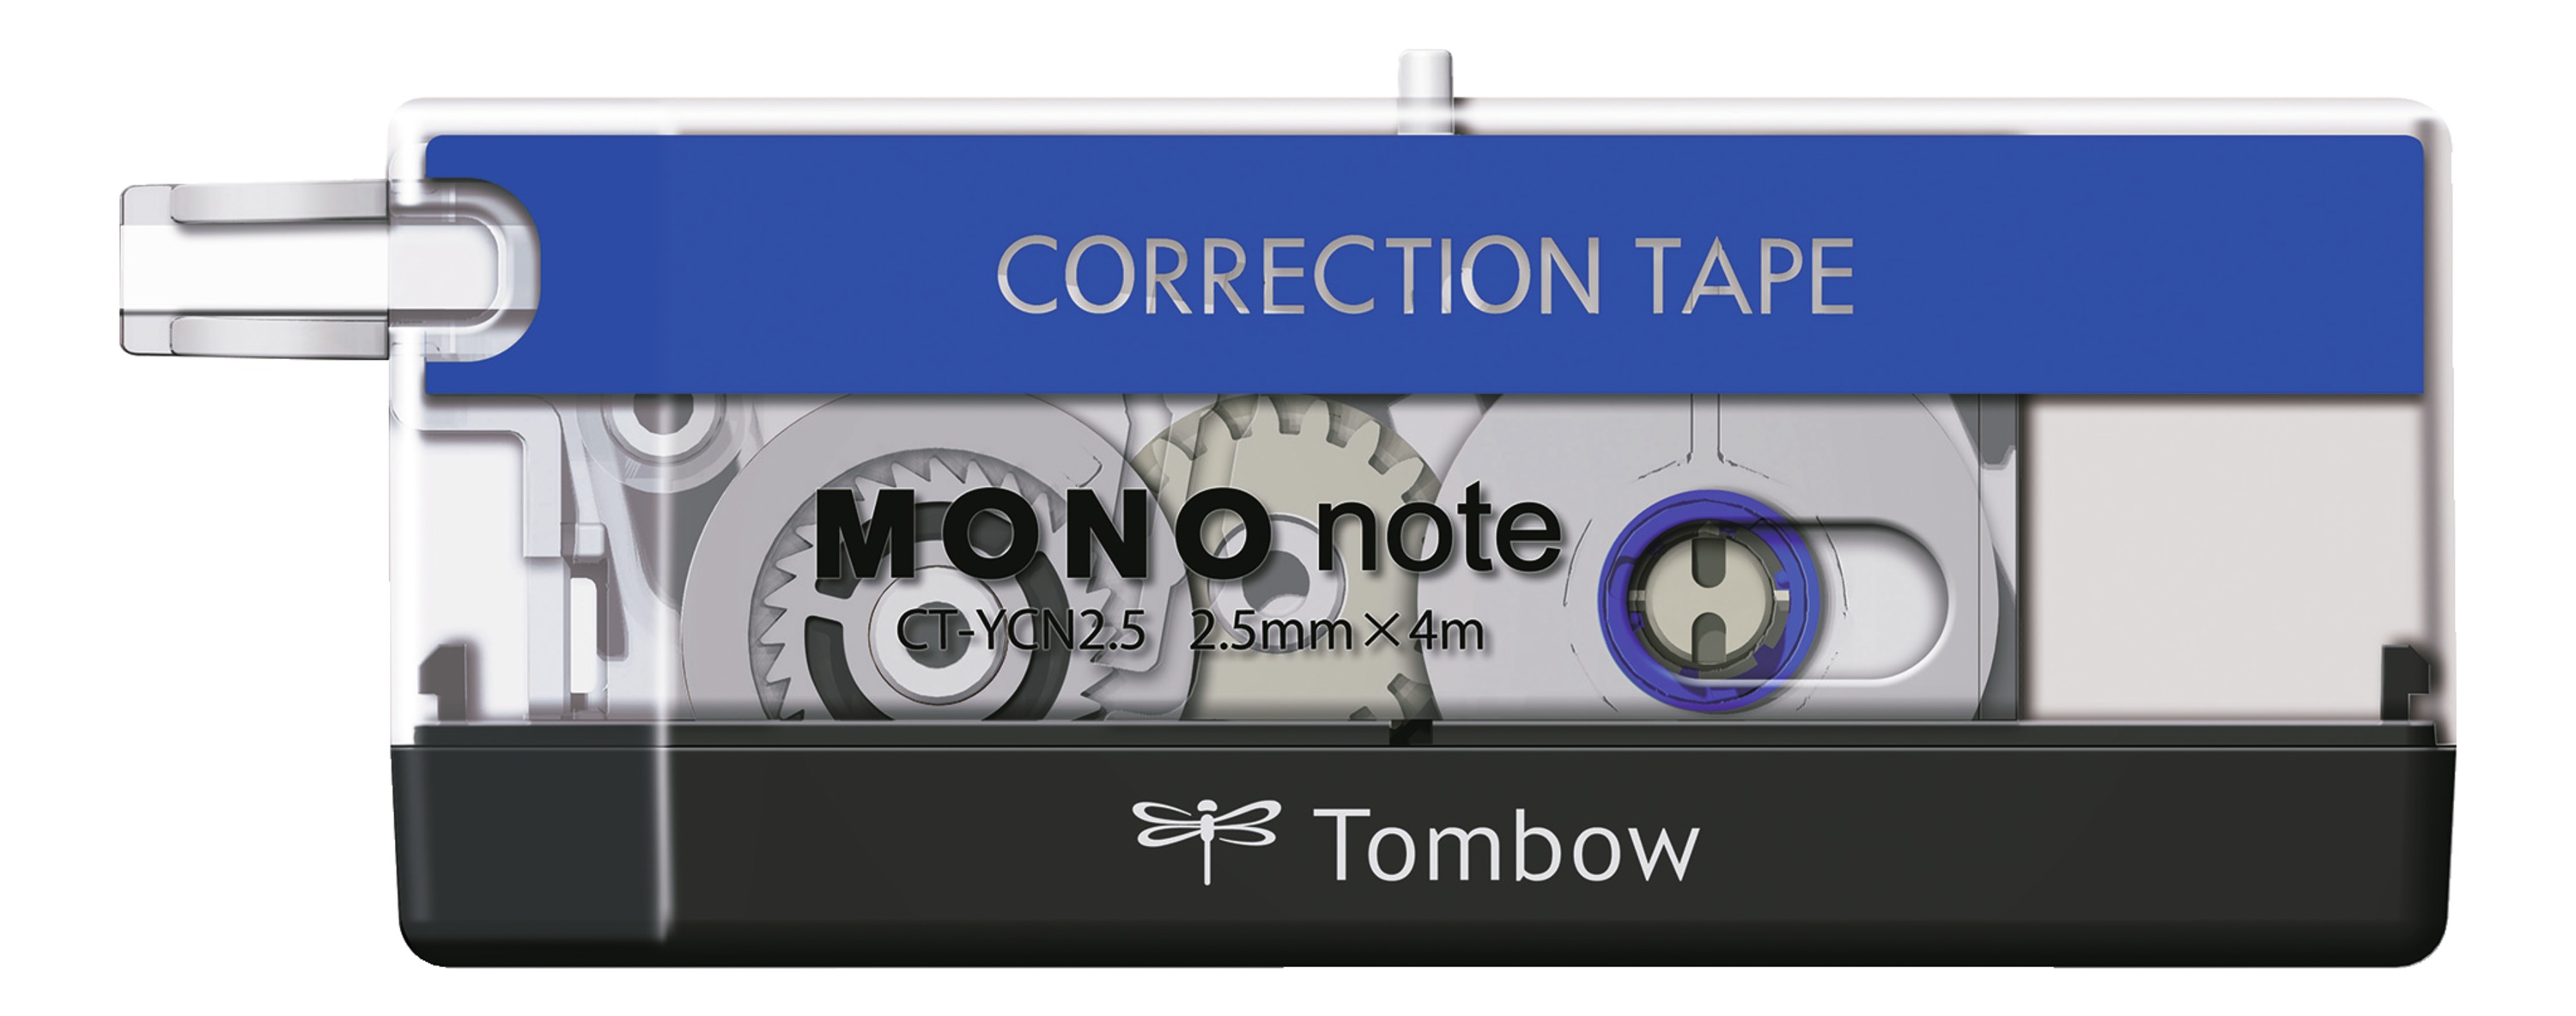 Correction Tape Tombow MONO Note Correction Tape Roller 2.5mmx4m White